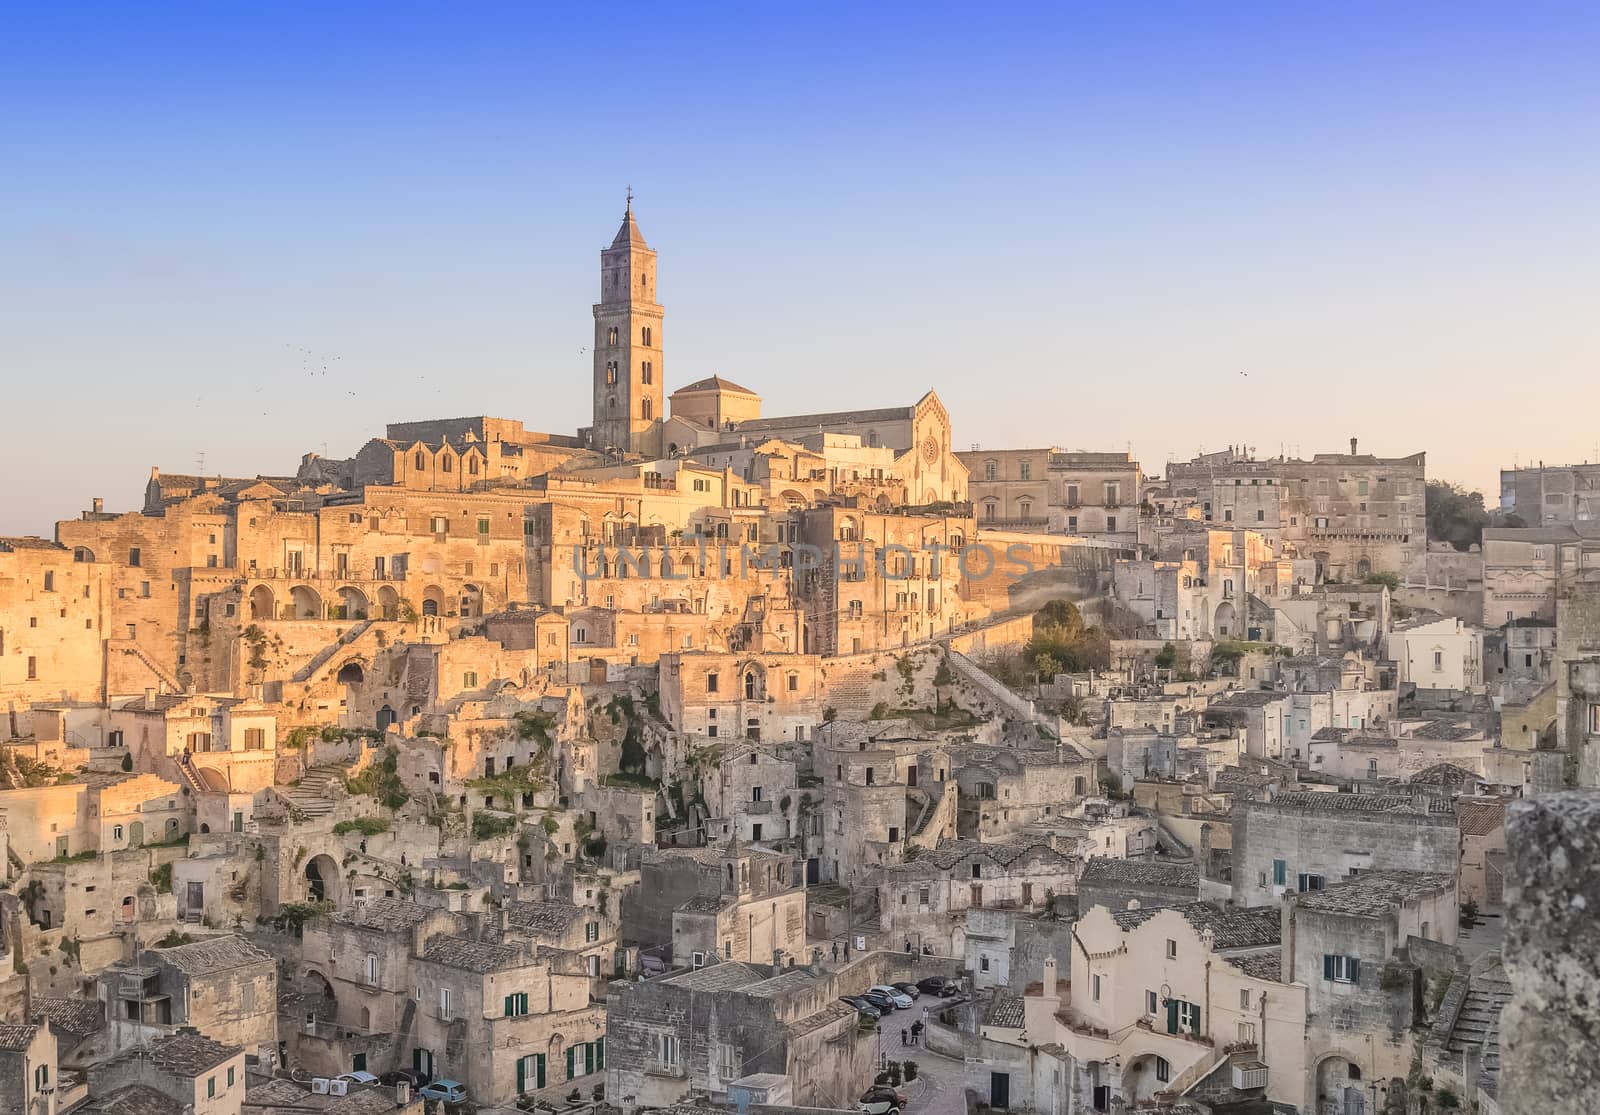 panoramic view of typical stones and church of Matera under begin sunset sky by donfiore